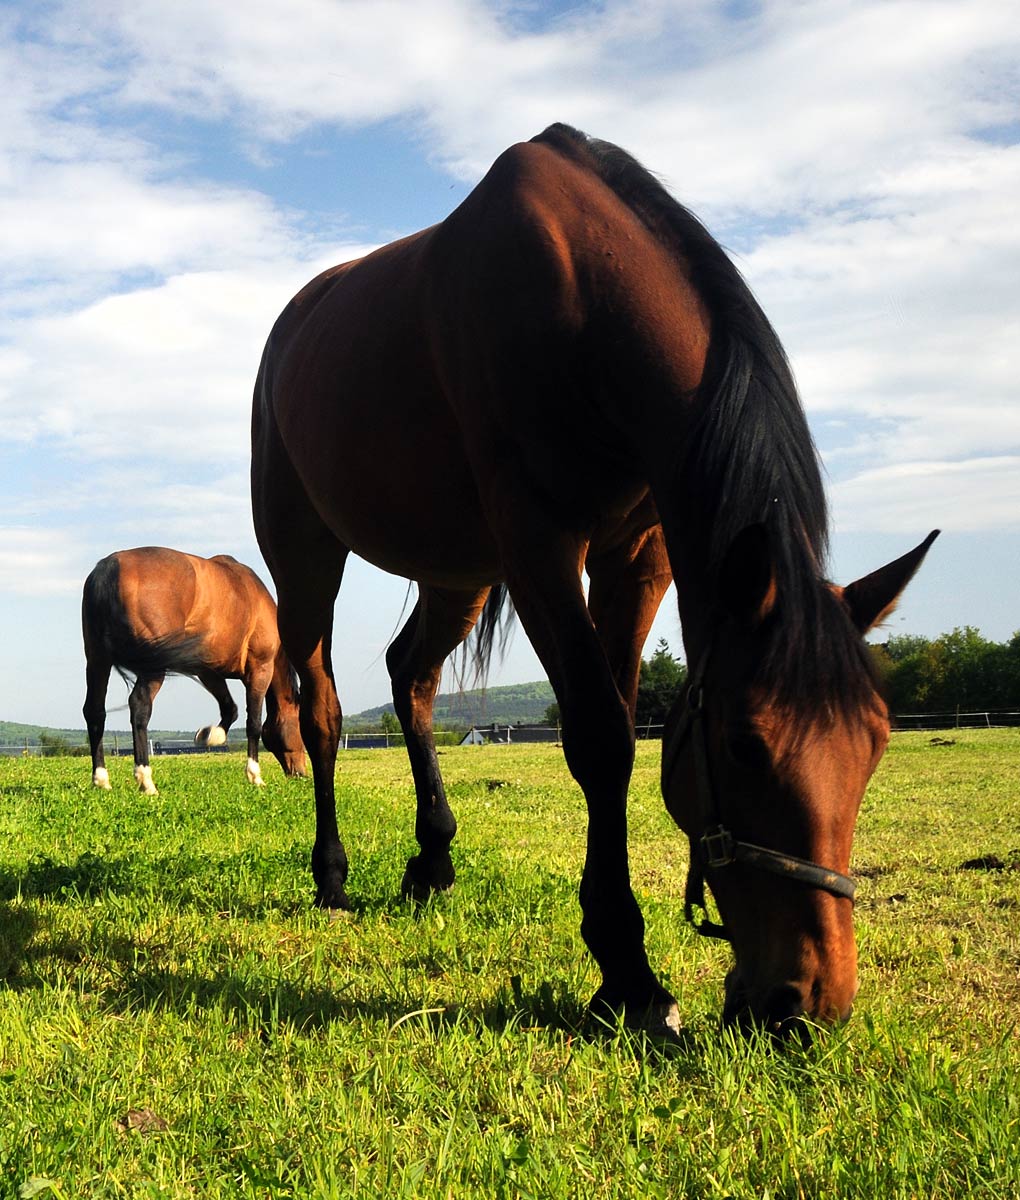 Equine Pasture Seed For Clay Soil